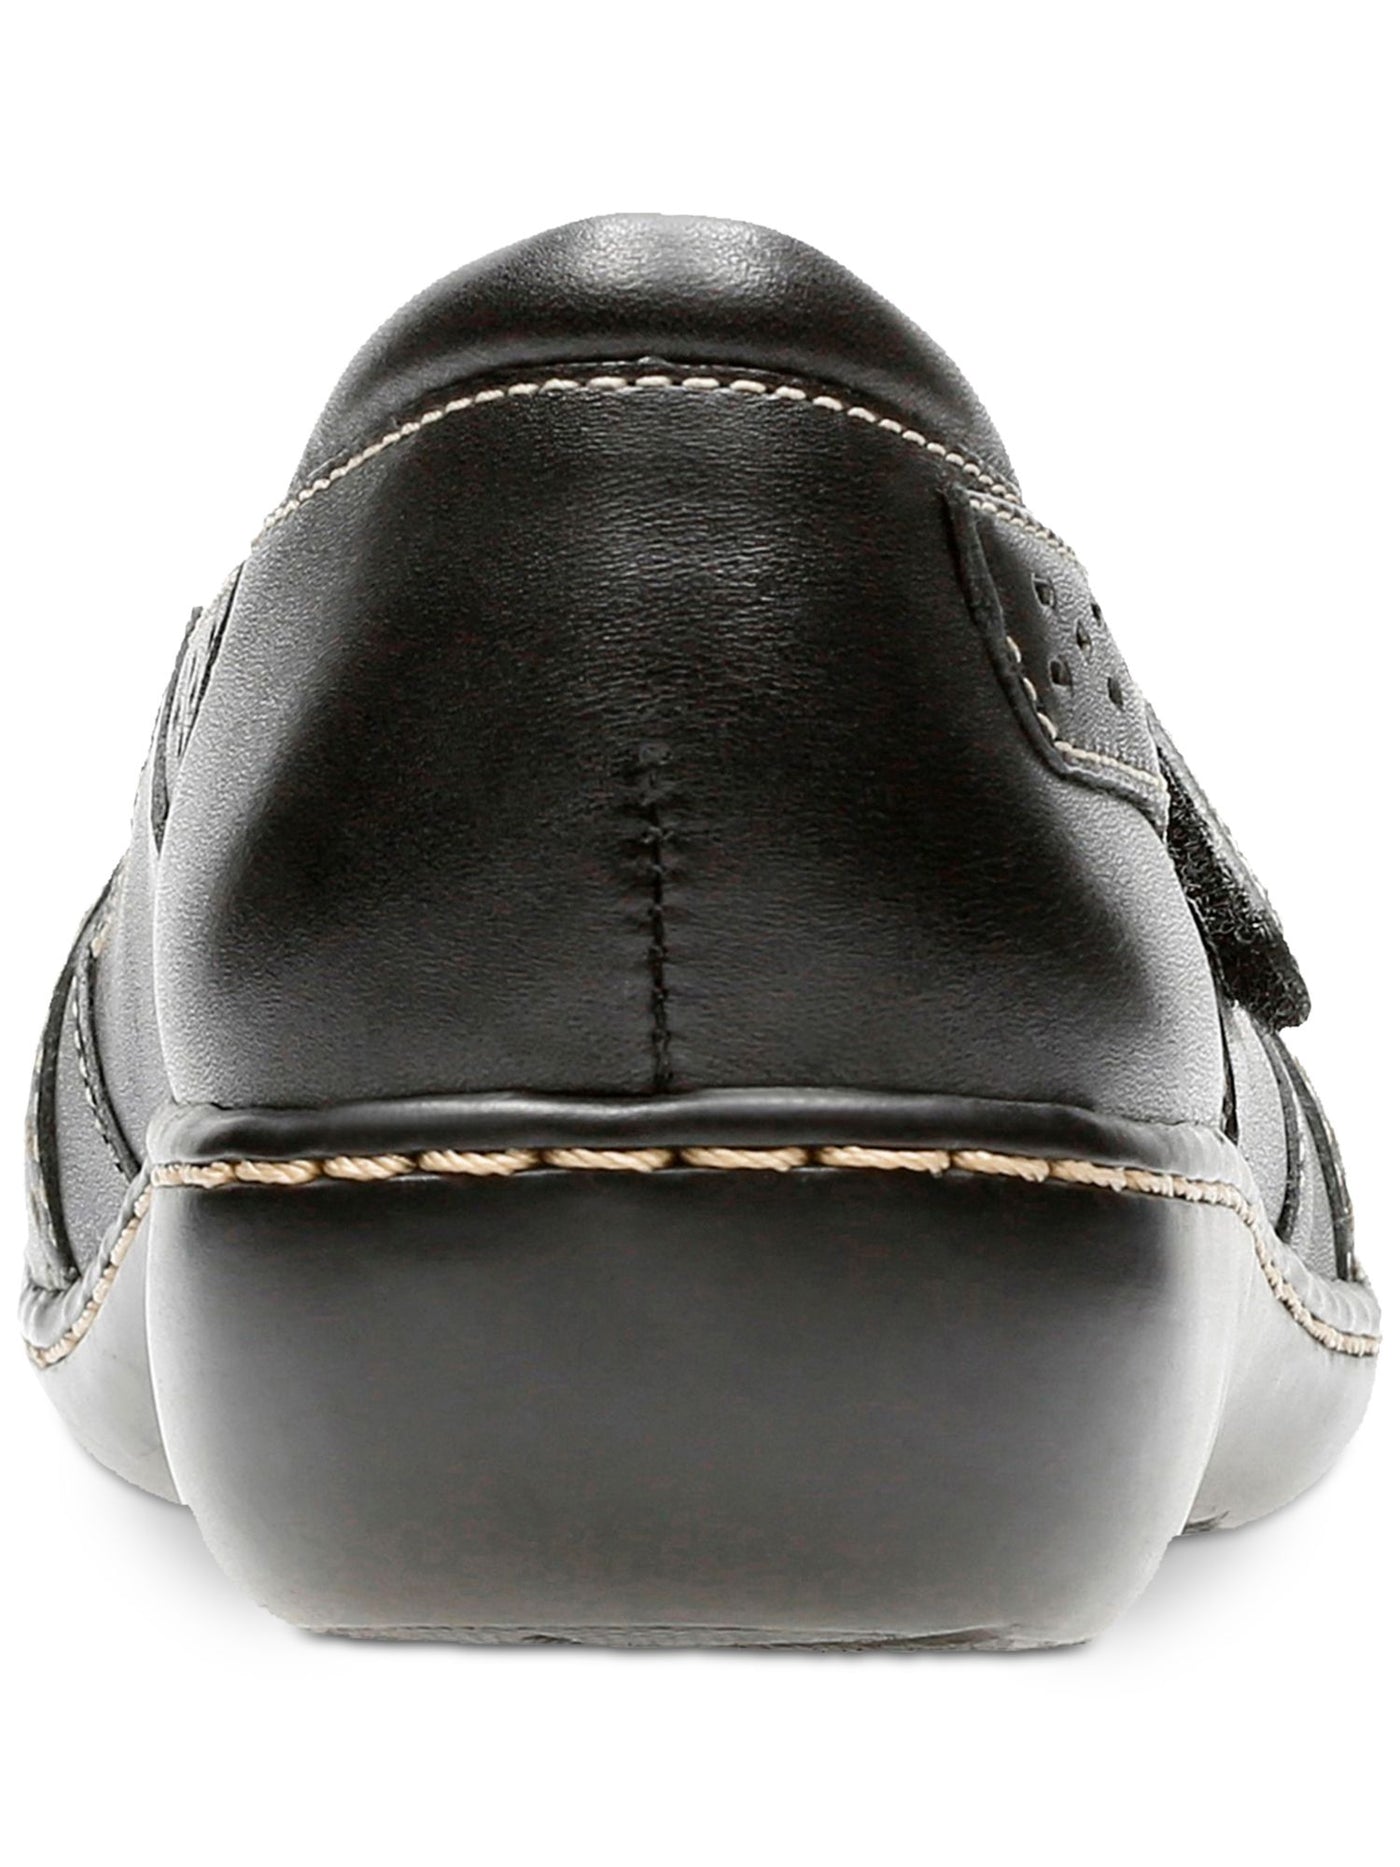 COLLECTION BY CLARKS Womens Black Cut Out Ashland Round Toe Leather Flats Shoes 9 N